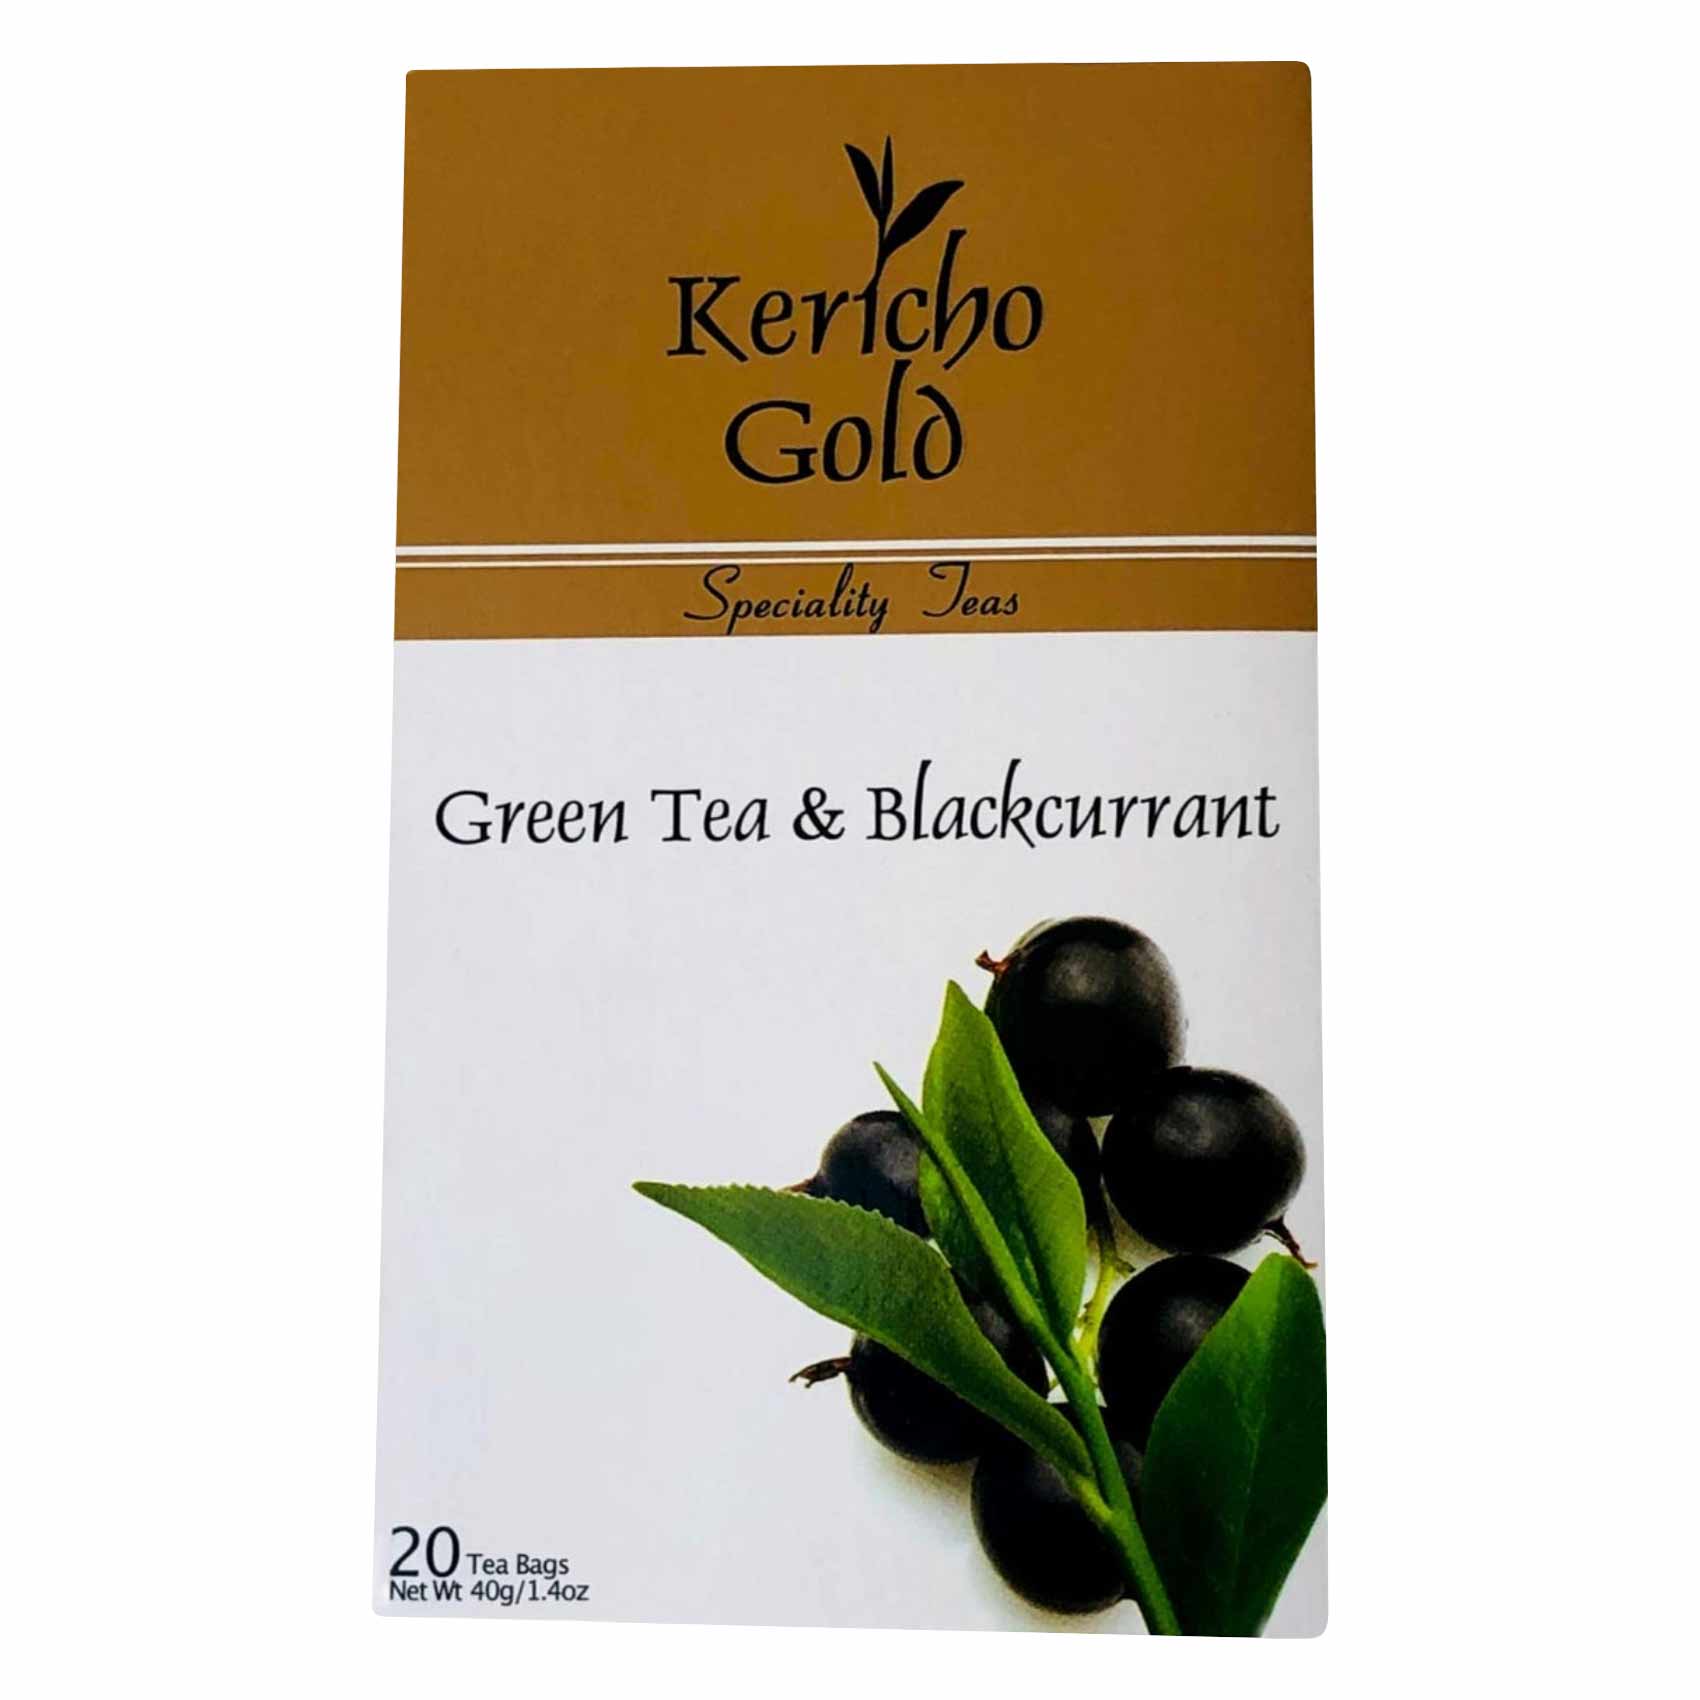 Kericho Gold Green Tea And Blackcurrant Tea Bags 2g x Pack of 20